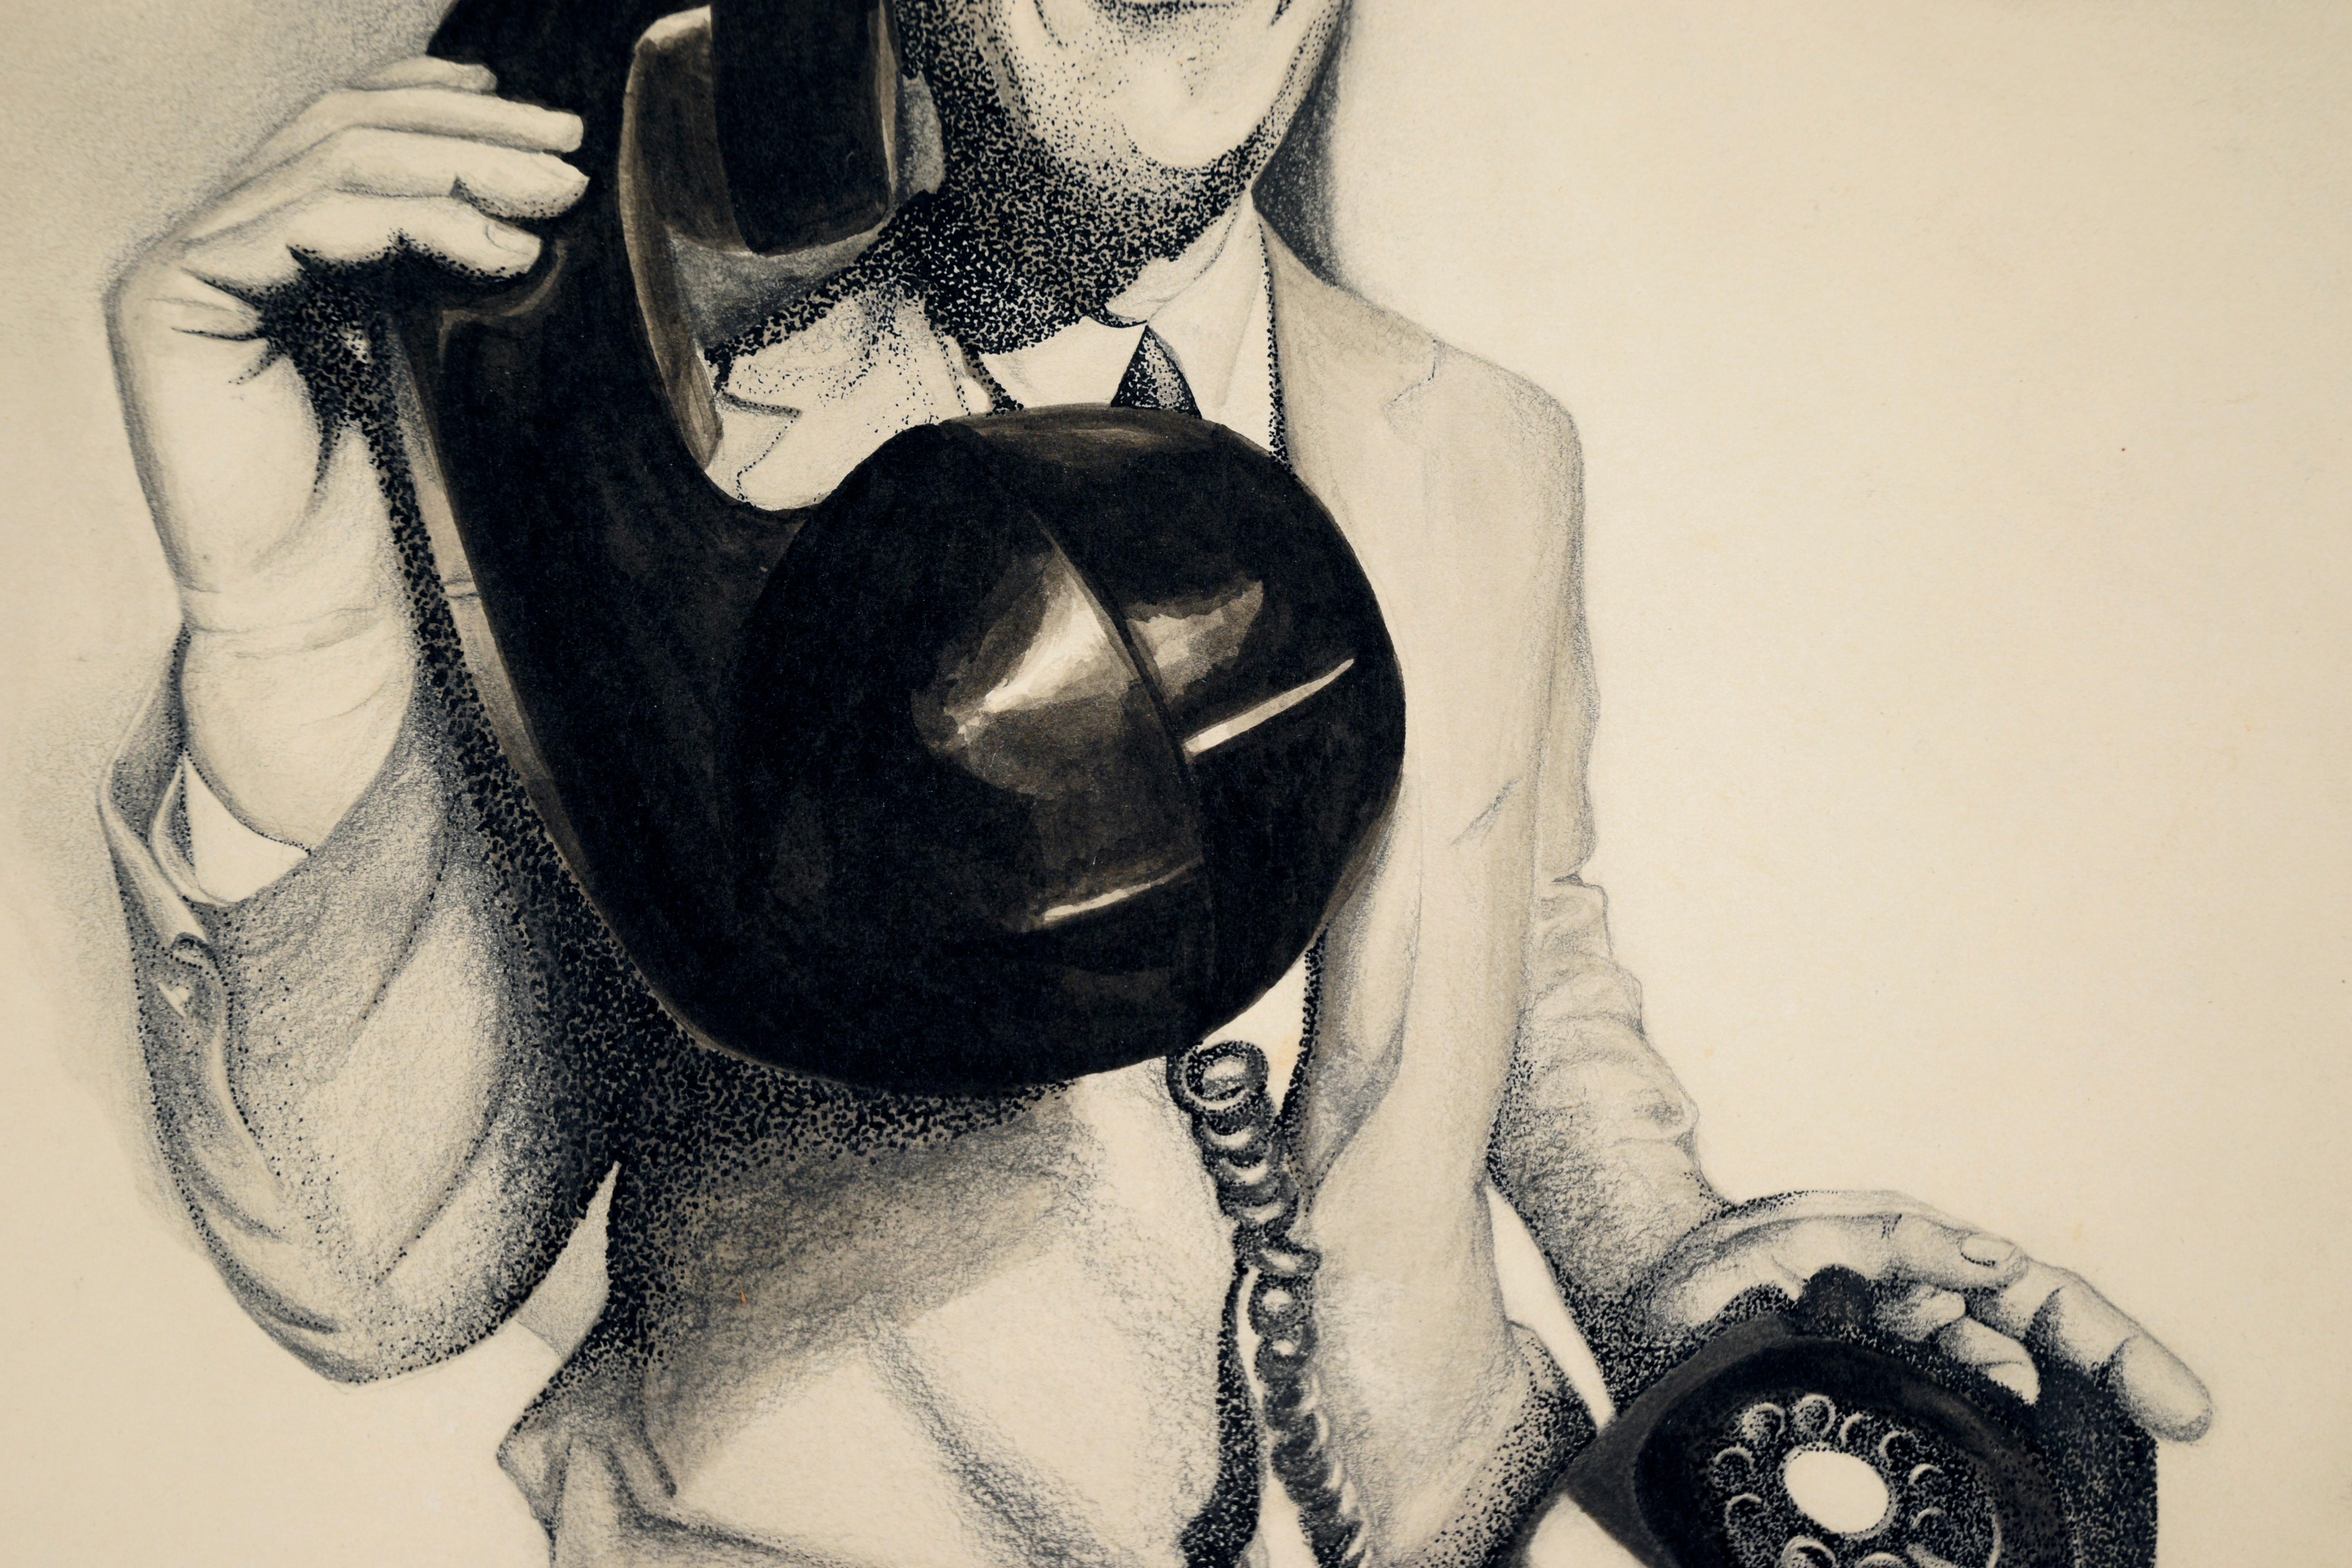 Man with Telephone - Surrealist Black and White Portrait in Ink on Paper

Surrealist composition by an unknown artist (20th Century). A man dressed in a suit holds an oversized telephone. He is reminiscent of a statue, as his eyes are notably devoid